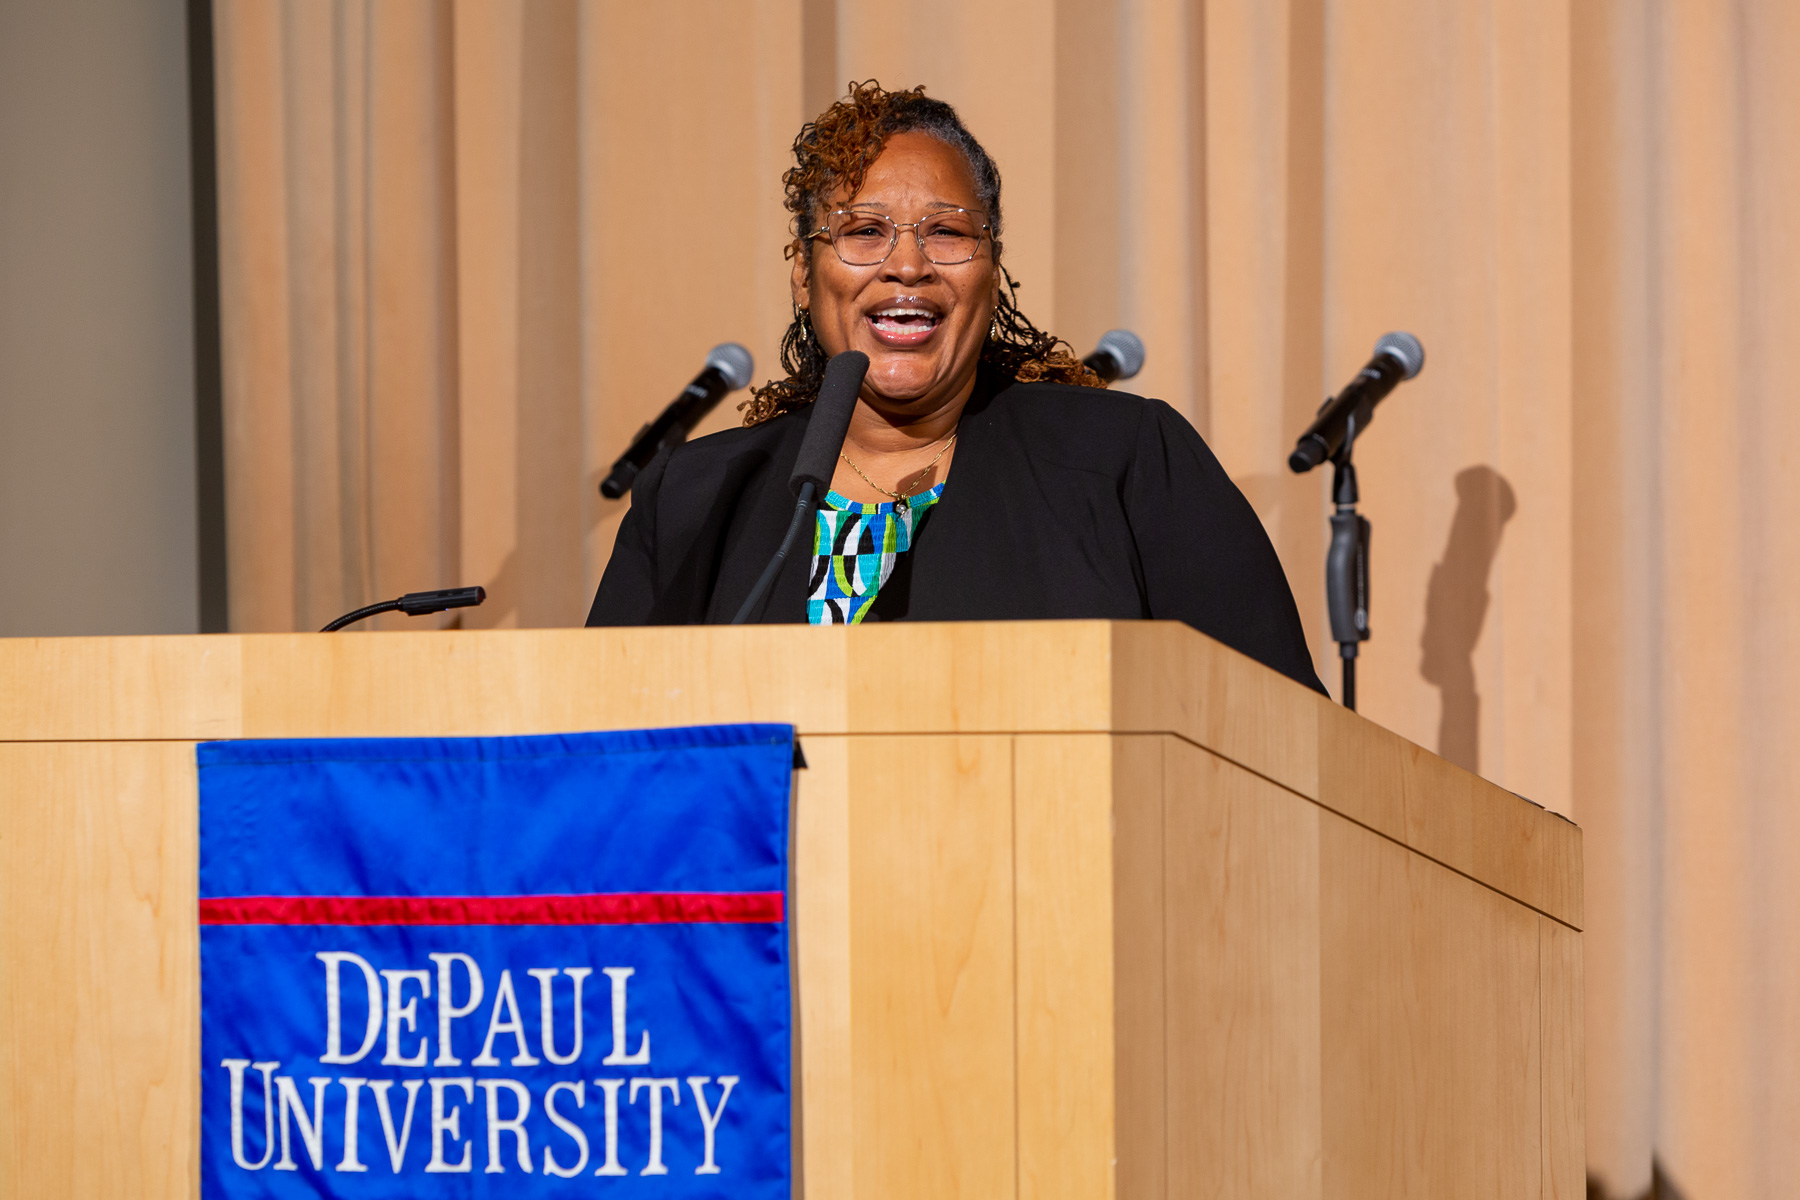 Sandra Bowen, senior grant and contracts specialists, leads the crowd in singing, “Lift Ev’ry Voice and Sing," by James Weldon Johnson. (DePaul University/Randall Spriggs)